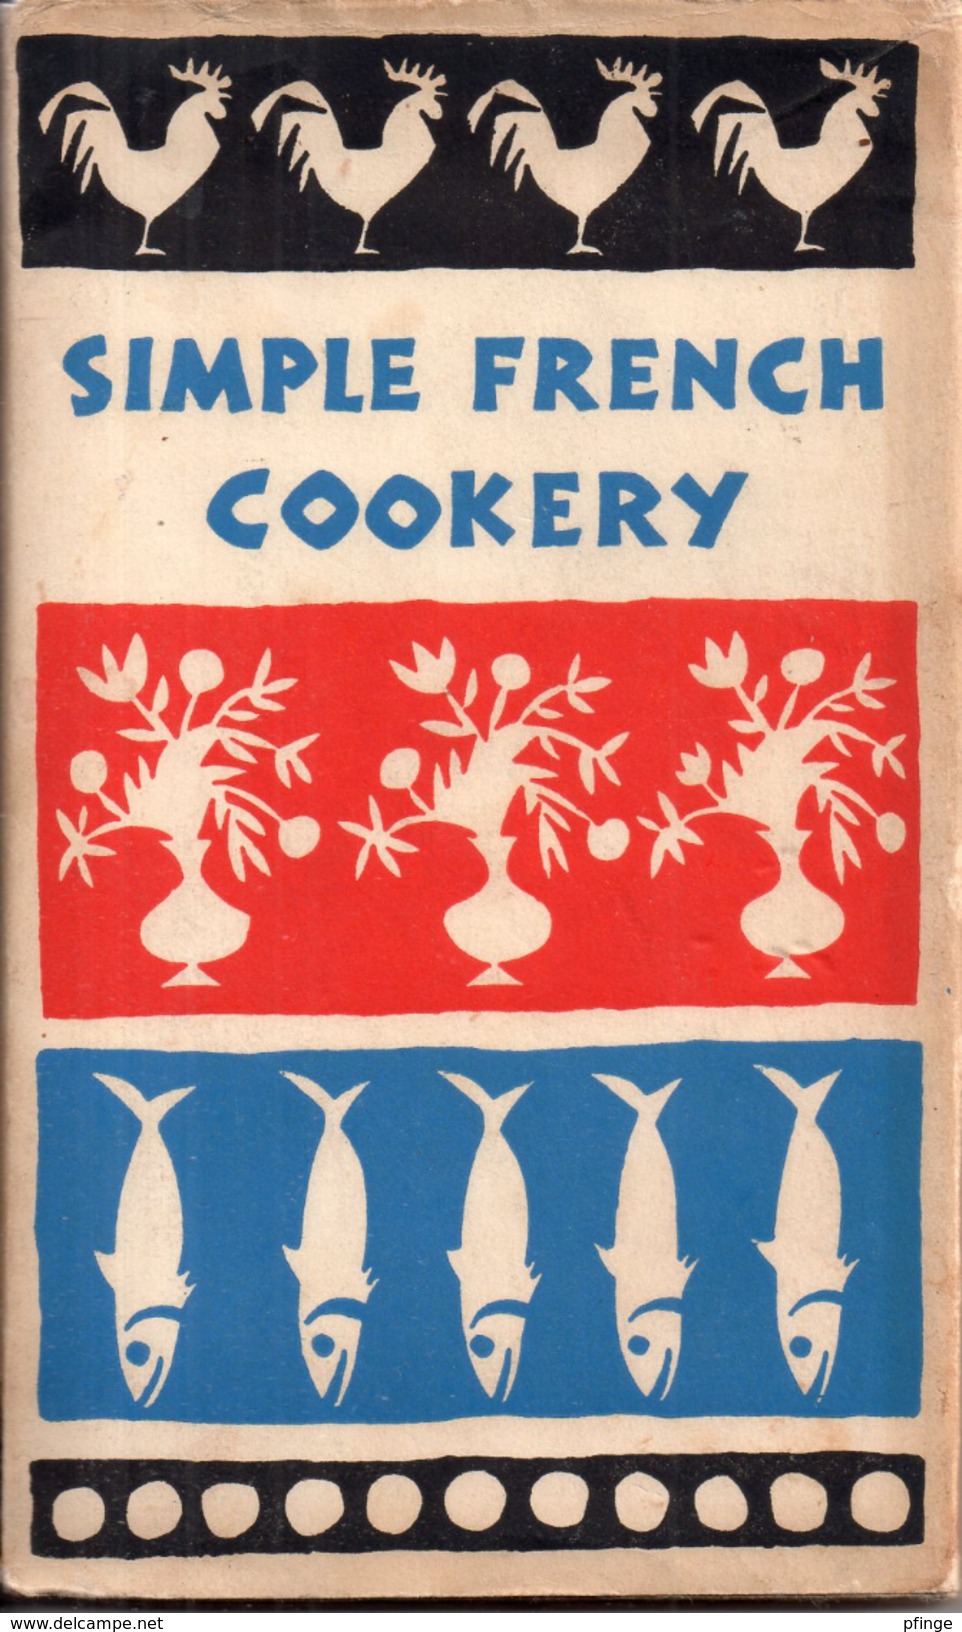 Simple French Cookery - Edna Beilenson - Décorations : Ruth McCrea, 1958 - Europa